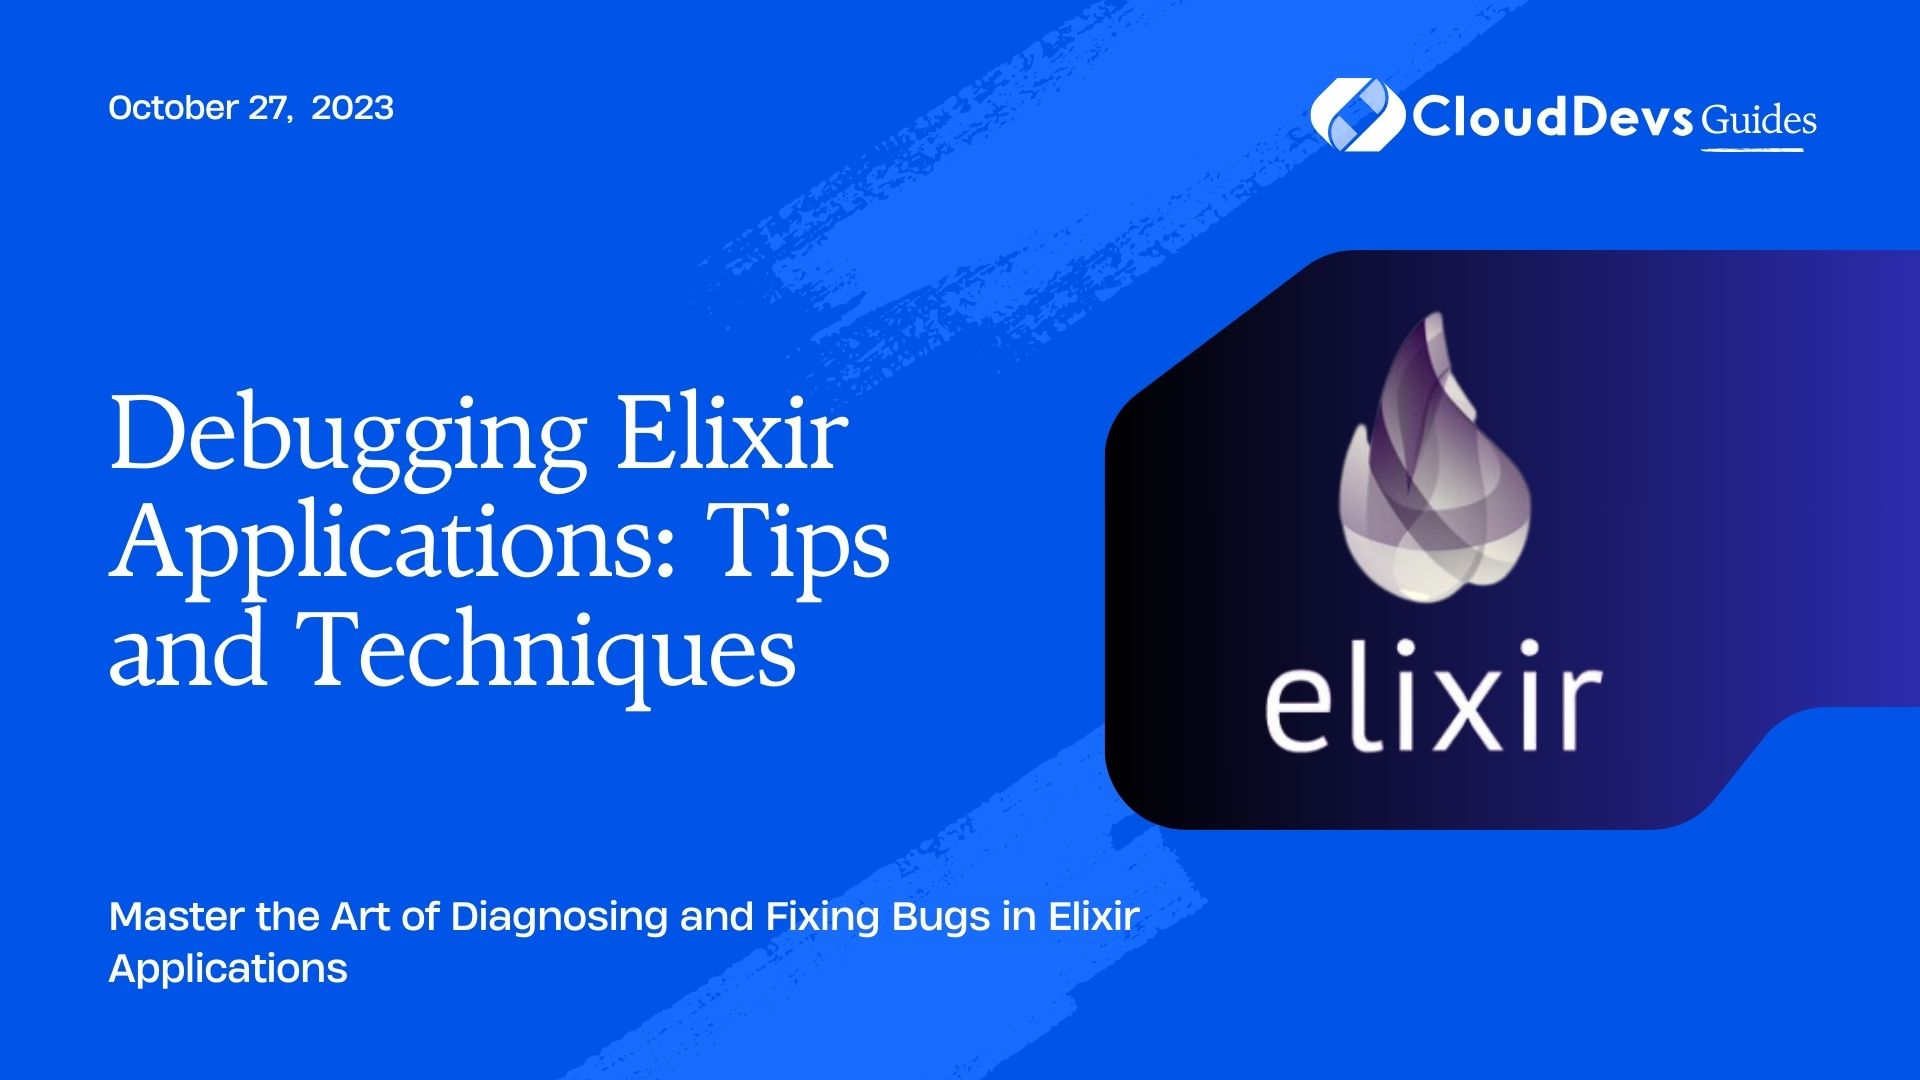 Debugging Elixir Applications: Tips and Techniques